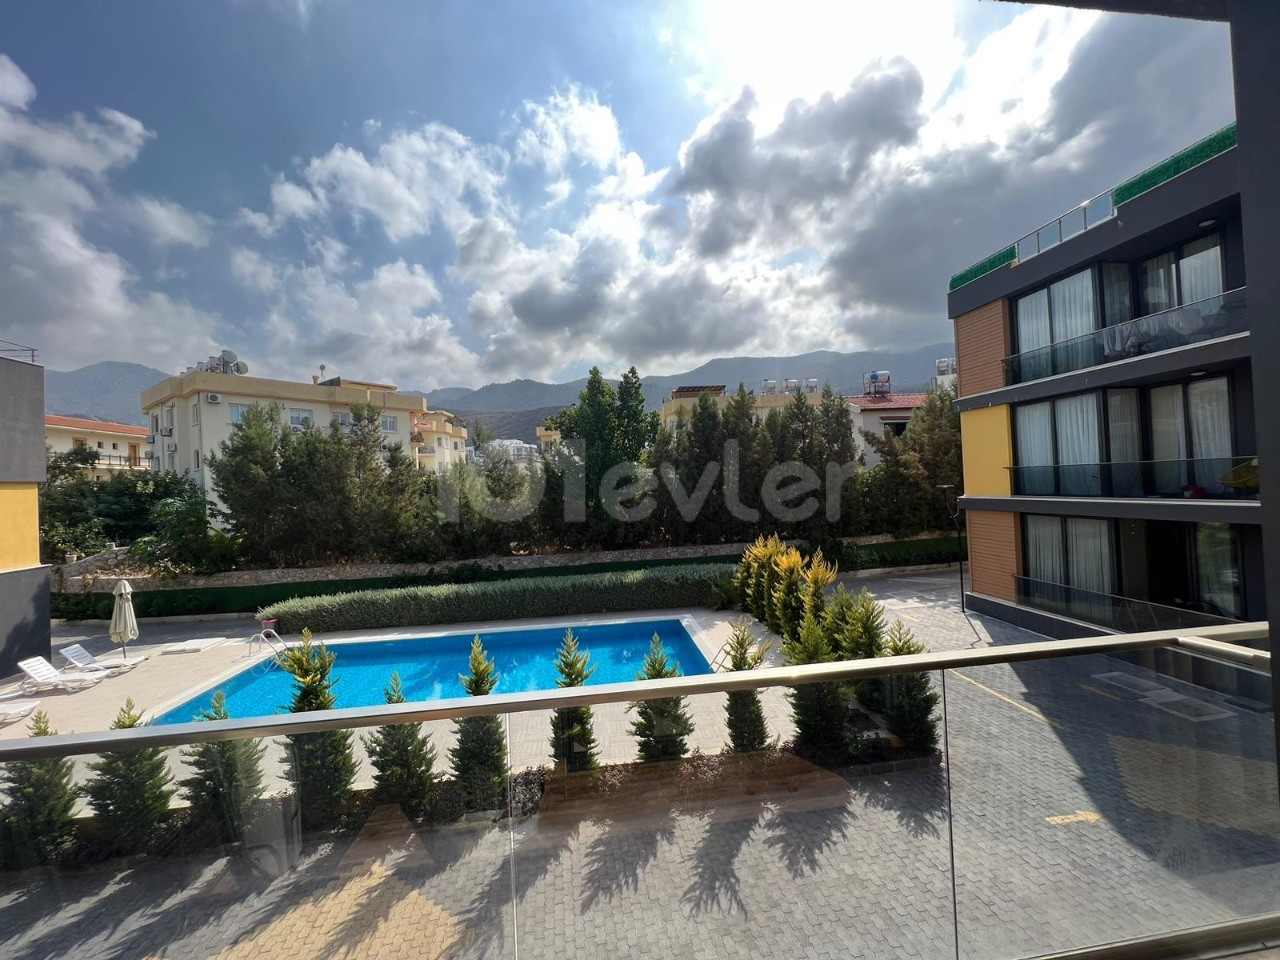 Clean and well-maintained rental apartment with shared pool Jul ** 